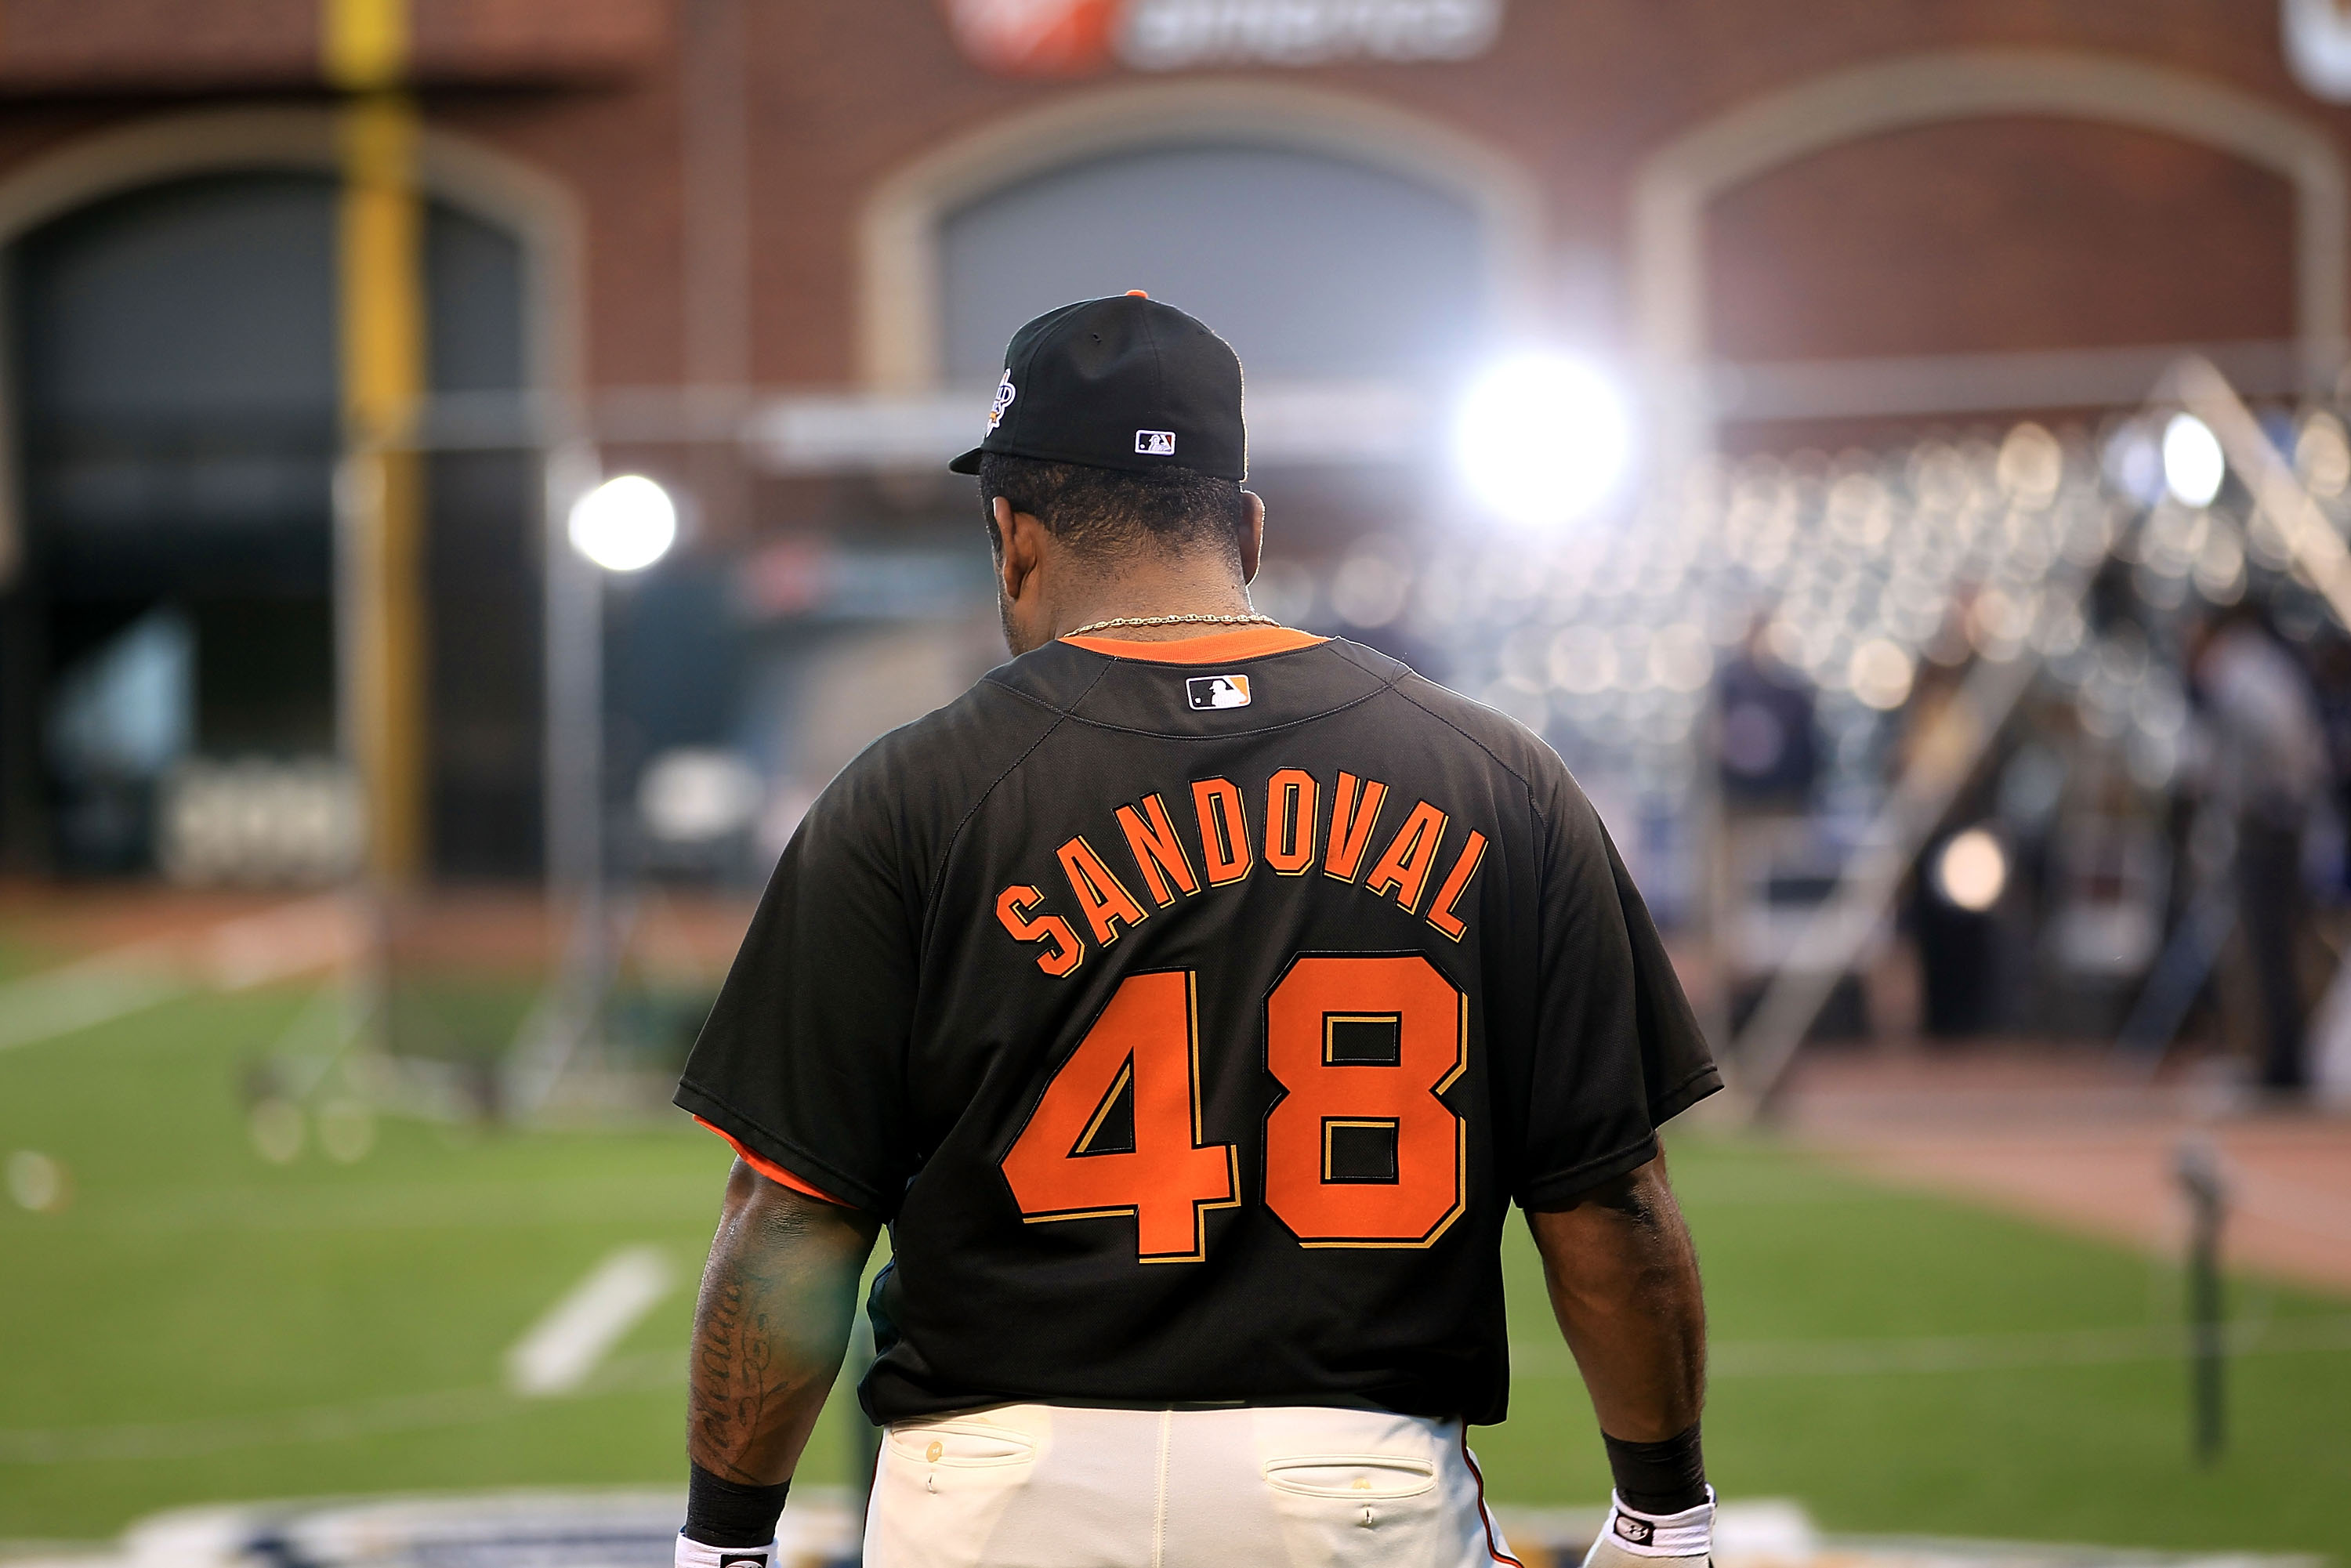 San Francisco Giants: Why This Hat Is the Worst Thing to Happen to Sports, News, Scores, Highlights, Stats, and Rumors